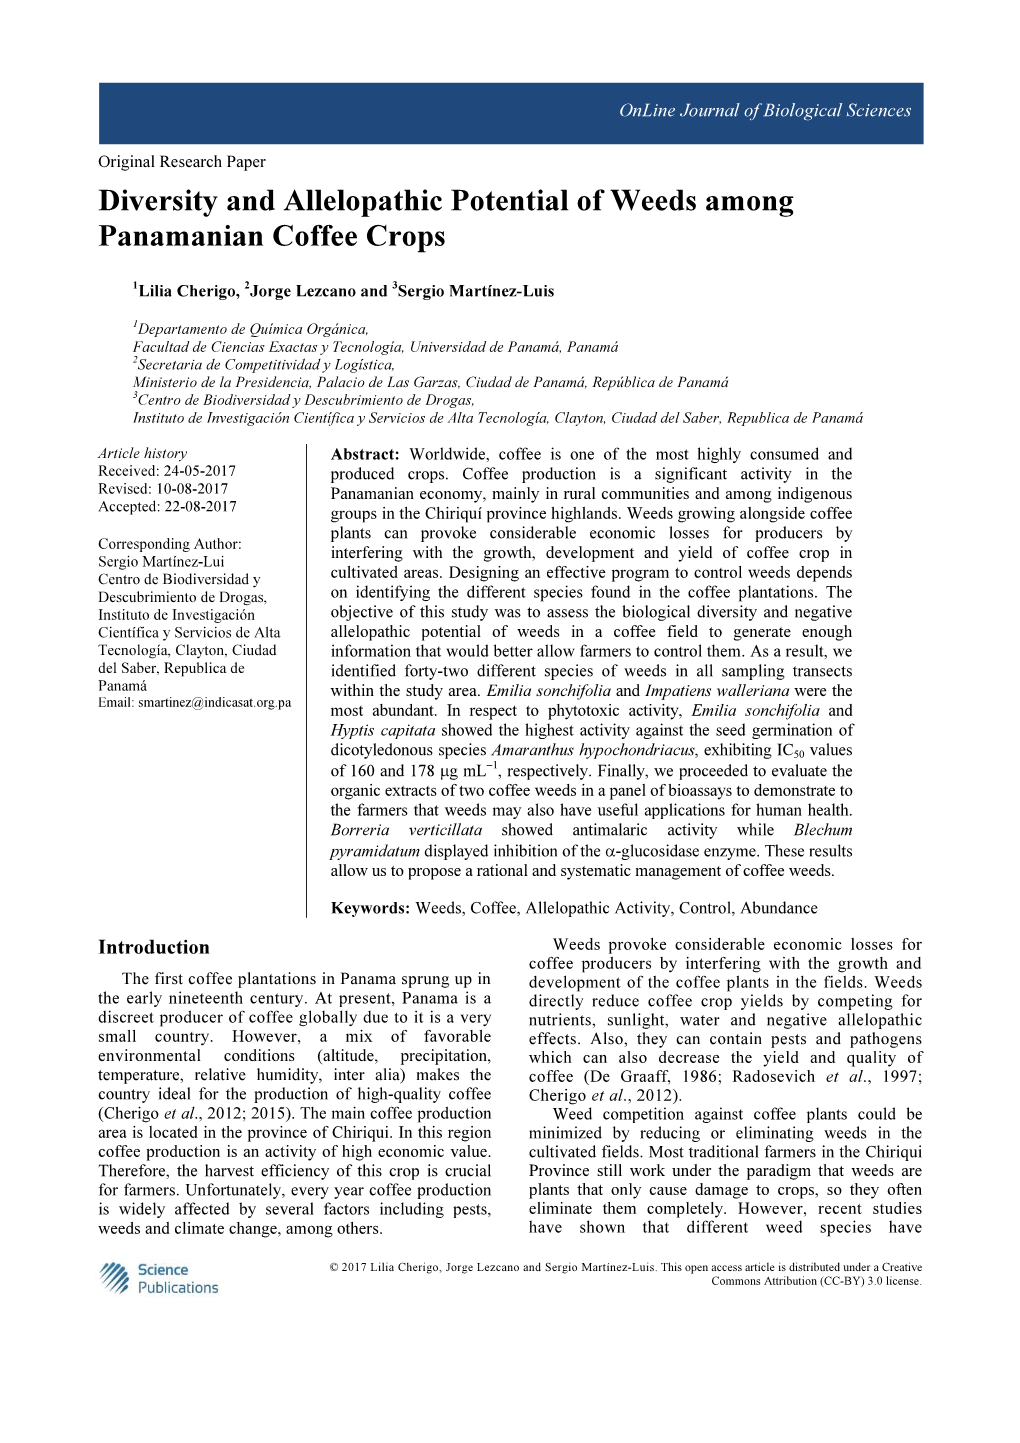 Diversity and Allelopathic Potential of Weeds Among Panamanian Coffee Crops